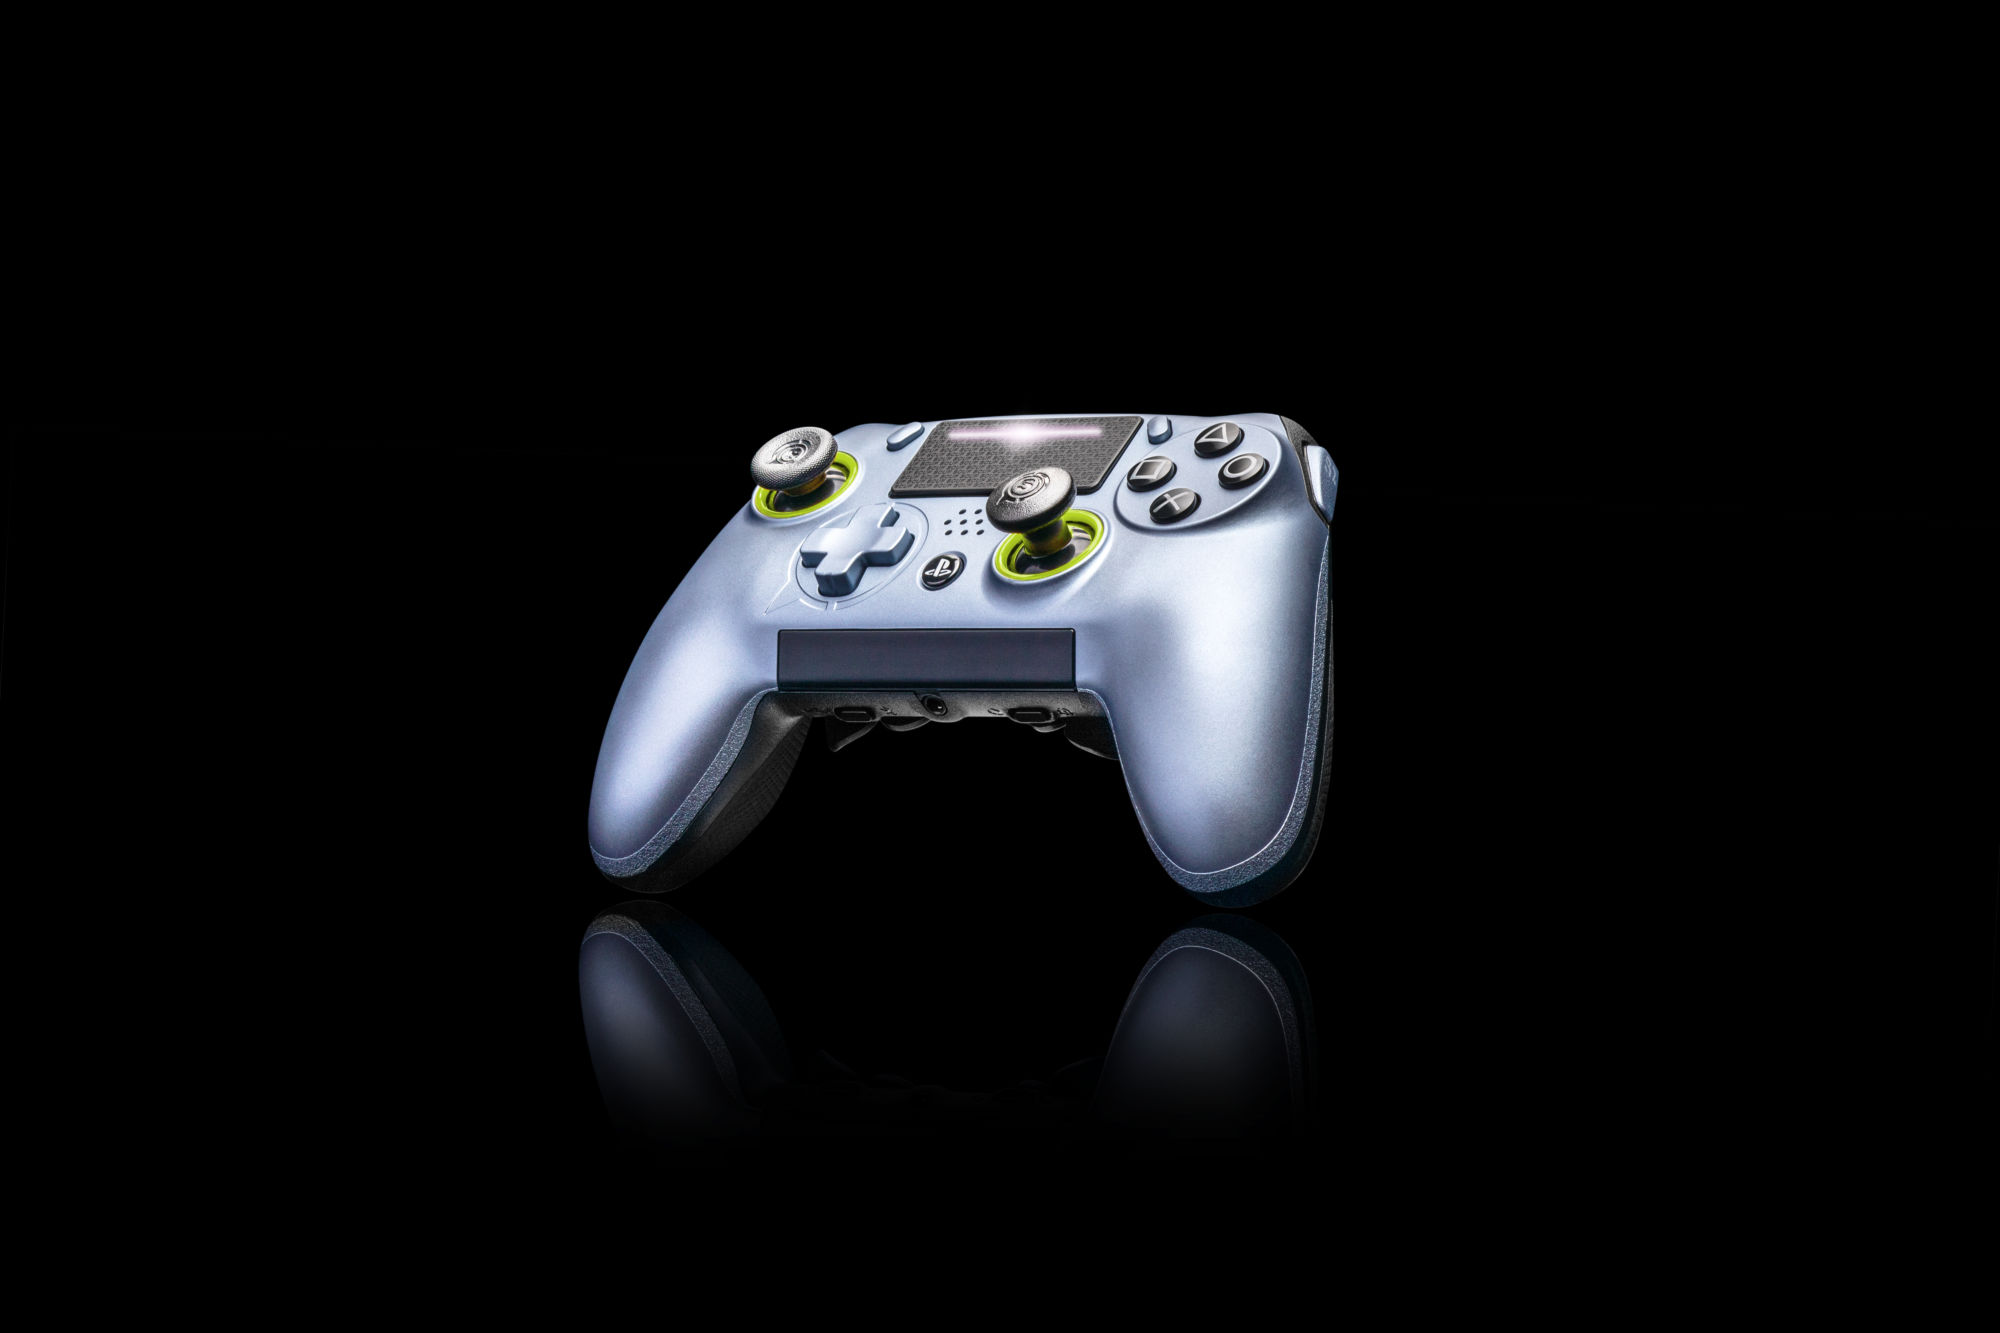 Scuf Gaming Launches The Vantage 2 Controller For PC & PS4